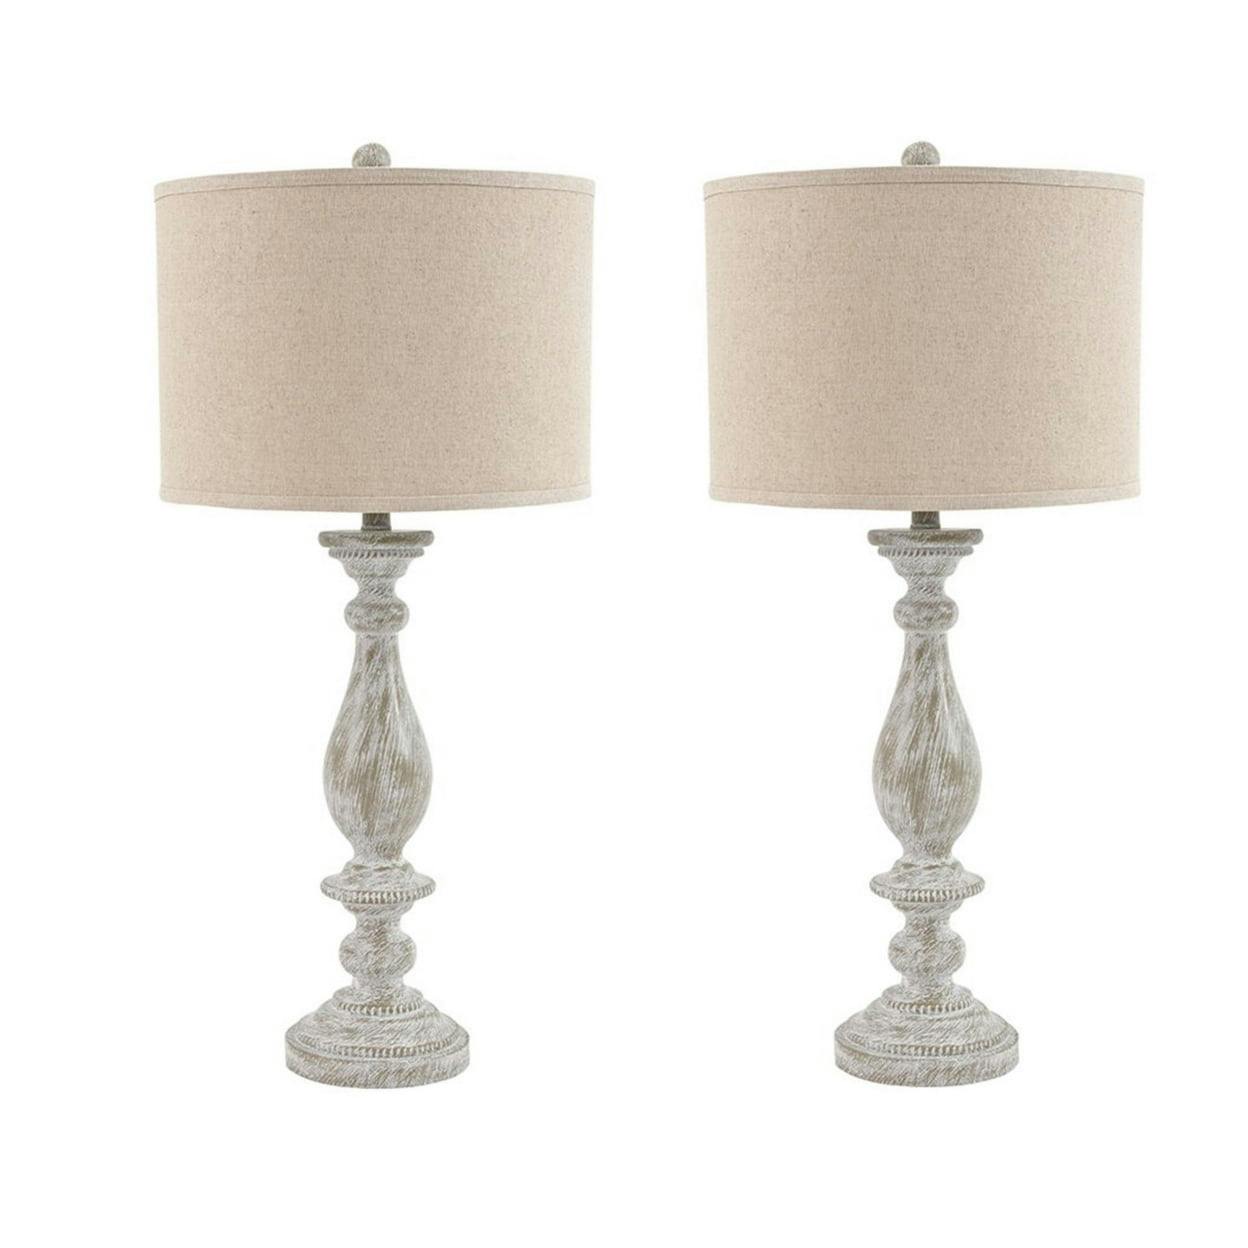 Contemporary Washed White Pedestal Table Lamp Set with 3-Way Switch